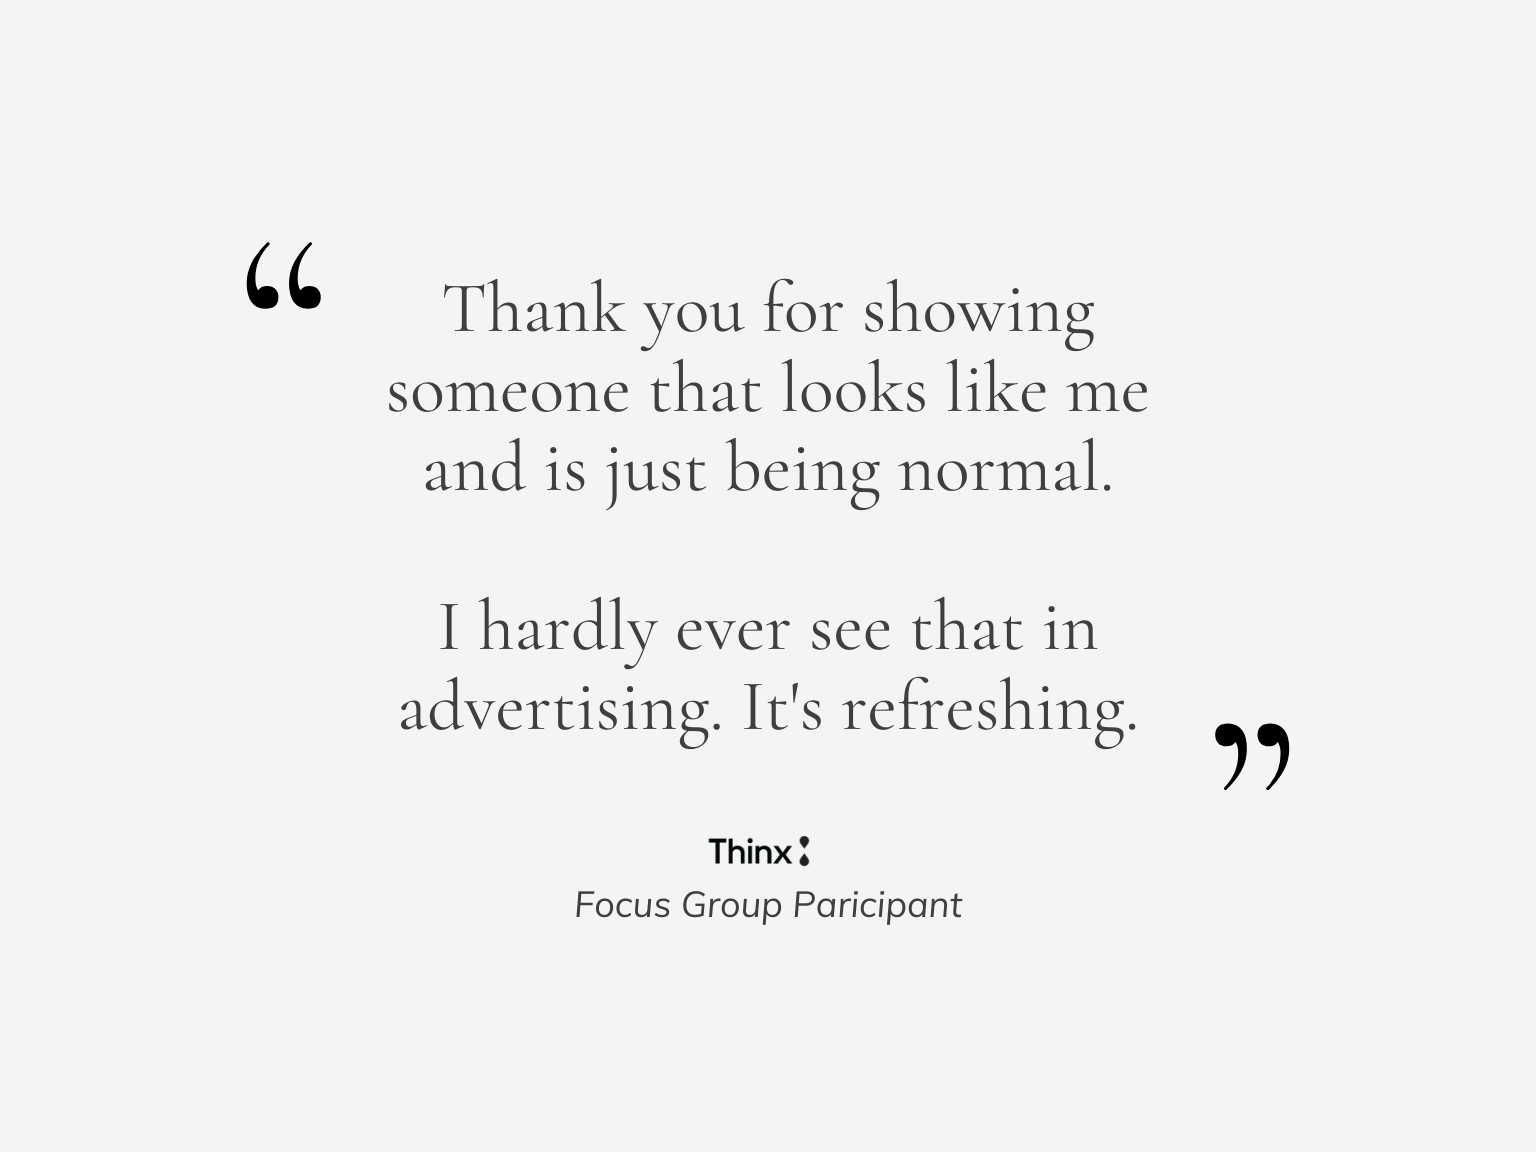 Grateful acknowledgment from a focus group participant about the refreshing and normalizing impact of seeing diverse model casting in advertising.